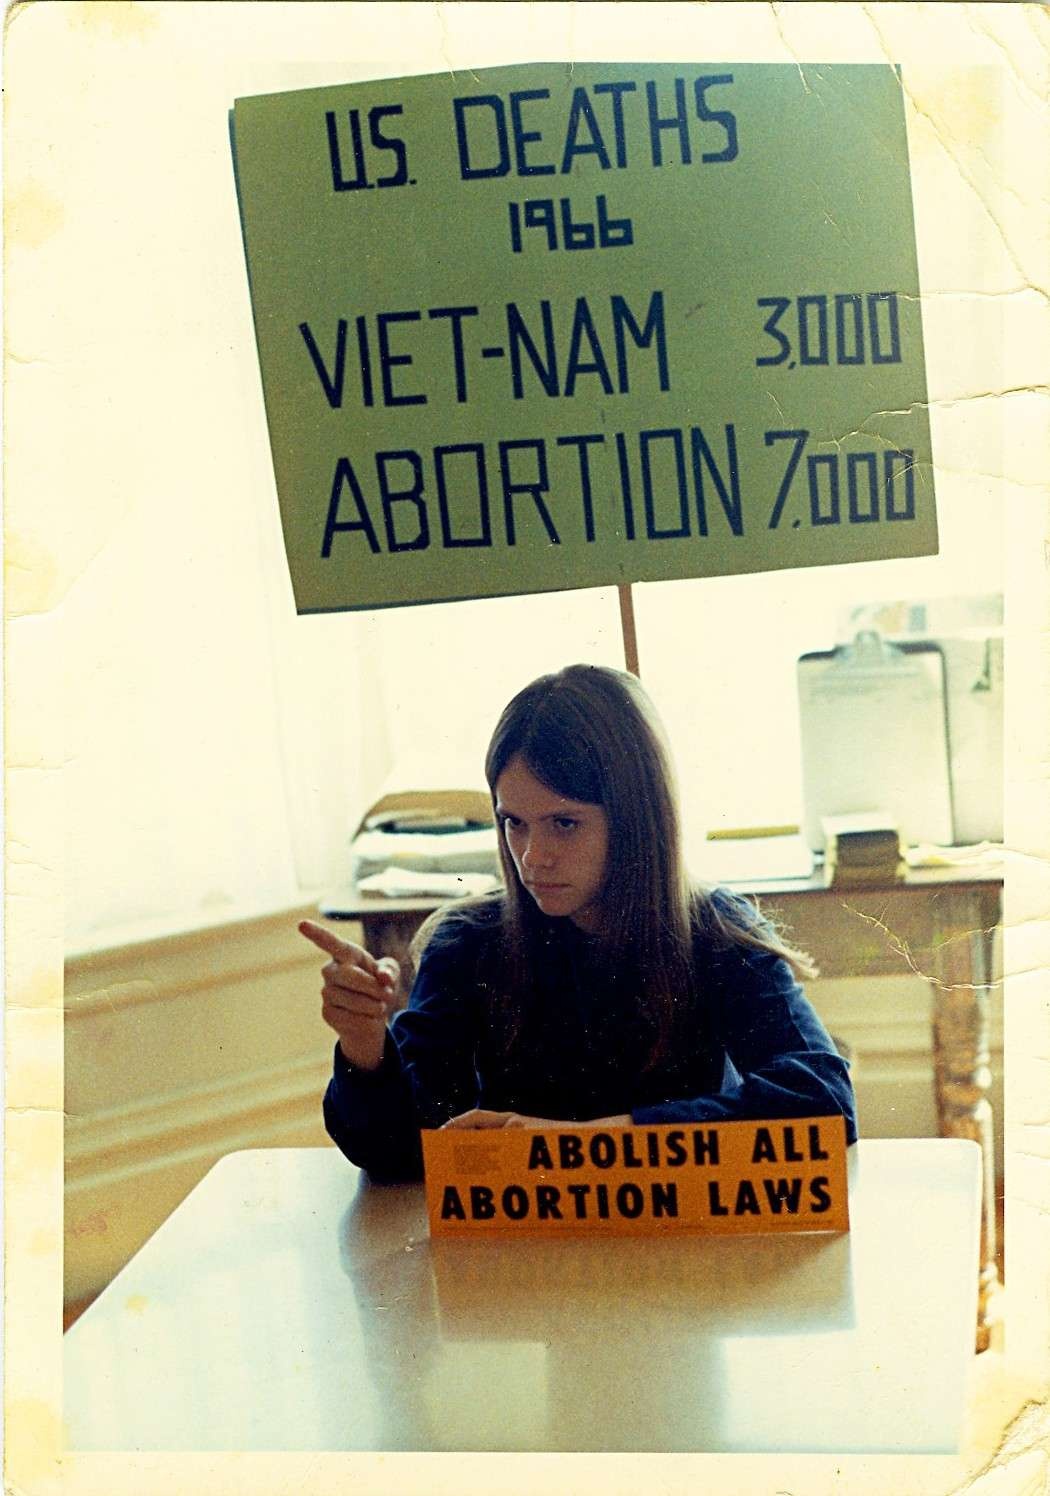 A young abortion rights activist sitting at a table with a sign behind her that reads: "U.S DEATHS, 1996, VIETNAM: 3,000, ABORTION, 7,000"